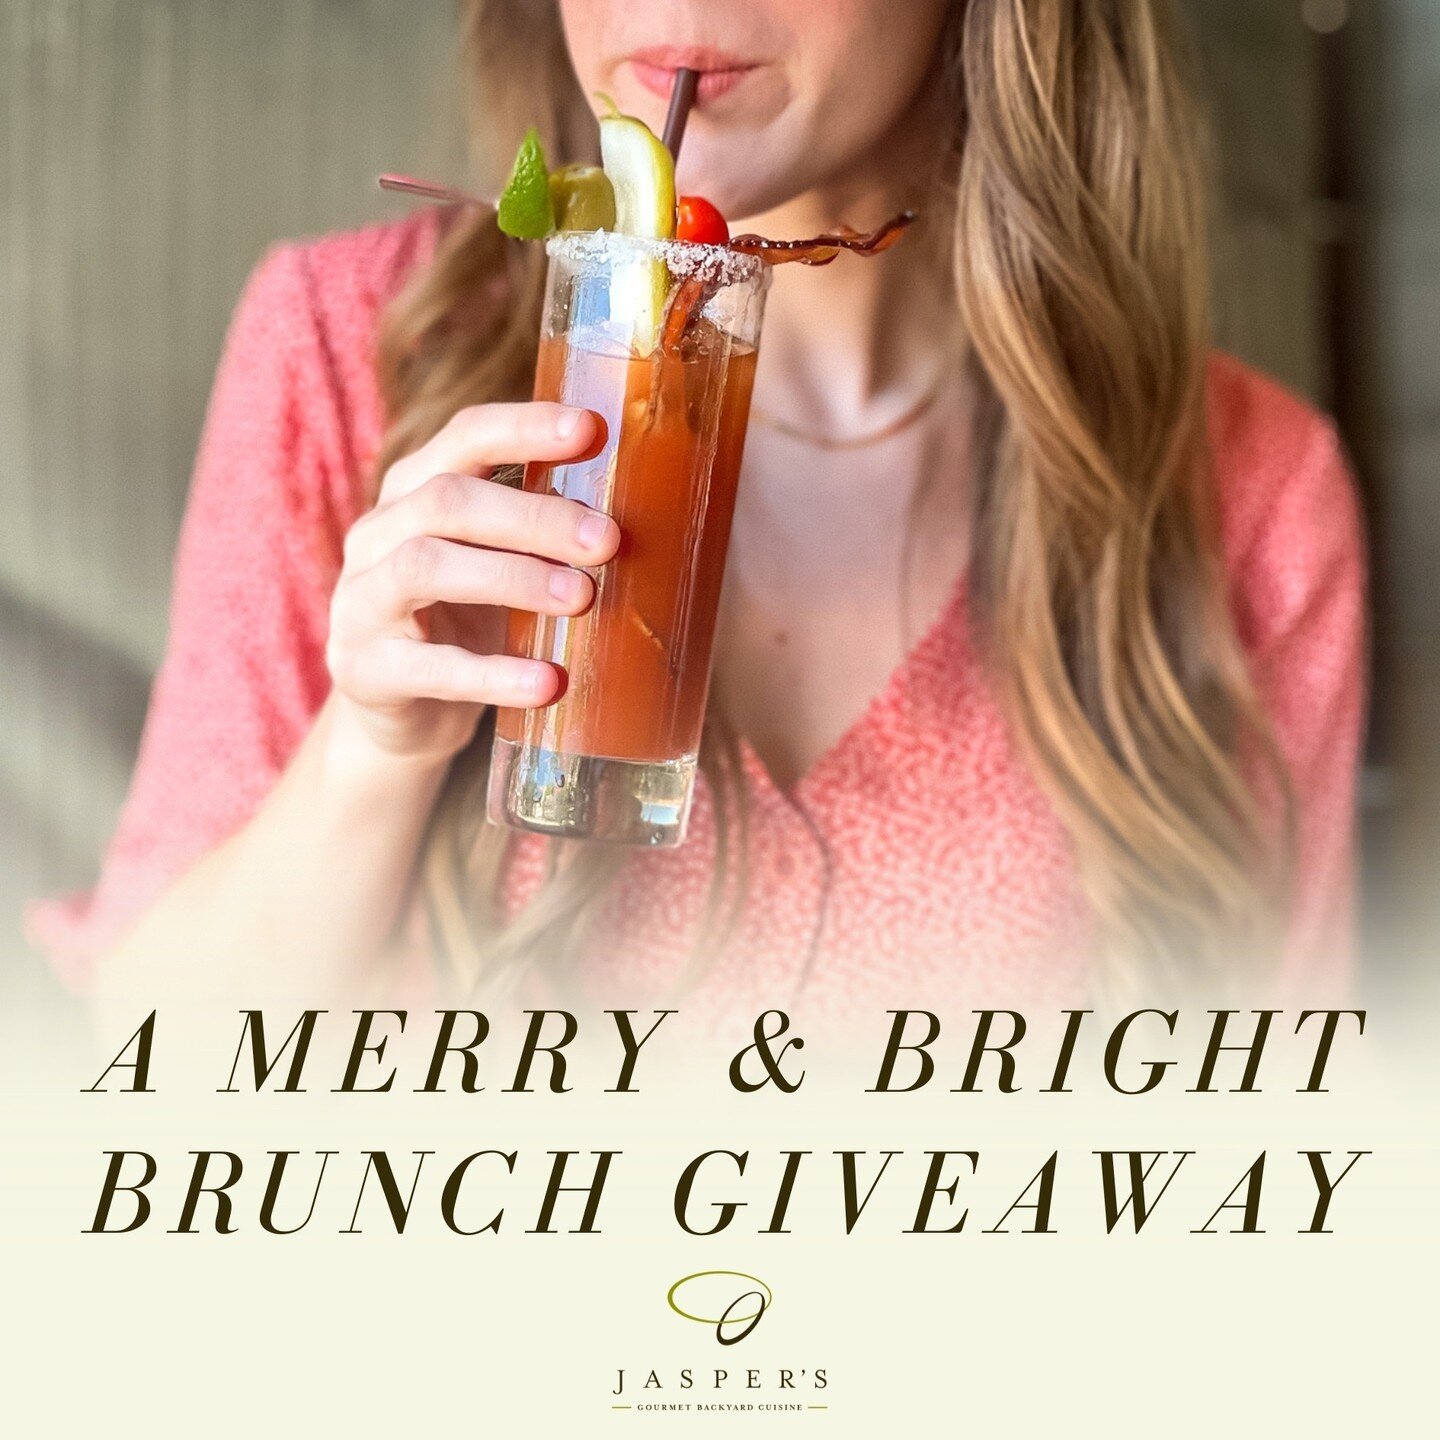 Christmas came early, and we&rsquo;re feeling the holiday spirit! Here&rsquo;s how to WIN a $100 gift card to treat yourself to BRUNCH this holiday season: 

🎁: Make sure you&rsquo;re following us 
🎁: Tag 2 of your &ldquo;brunch&rdquo; friends in t